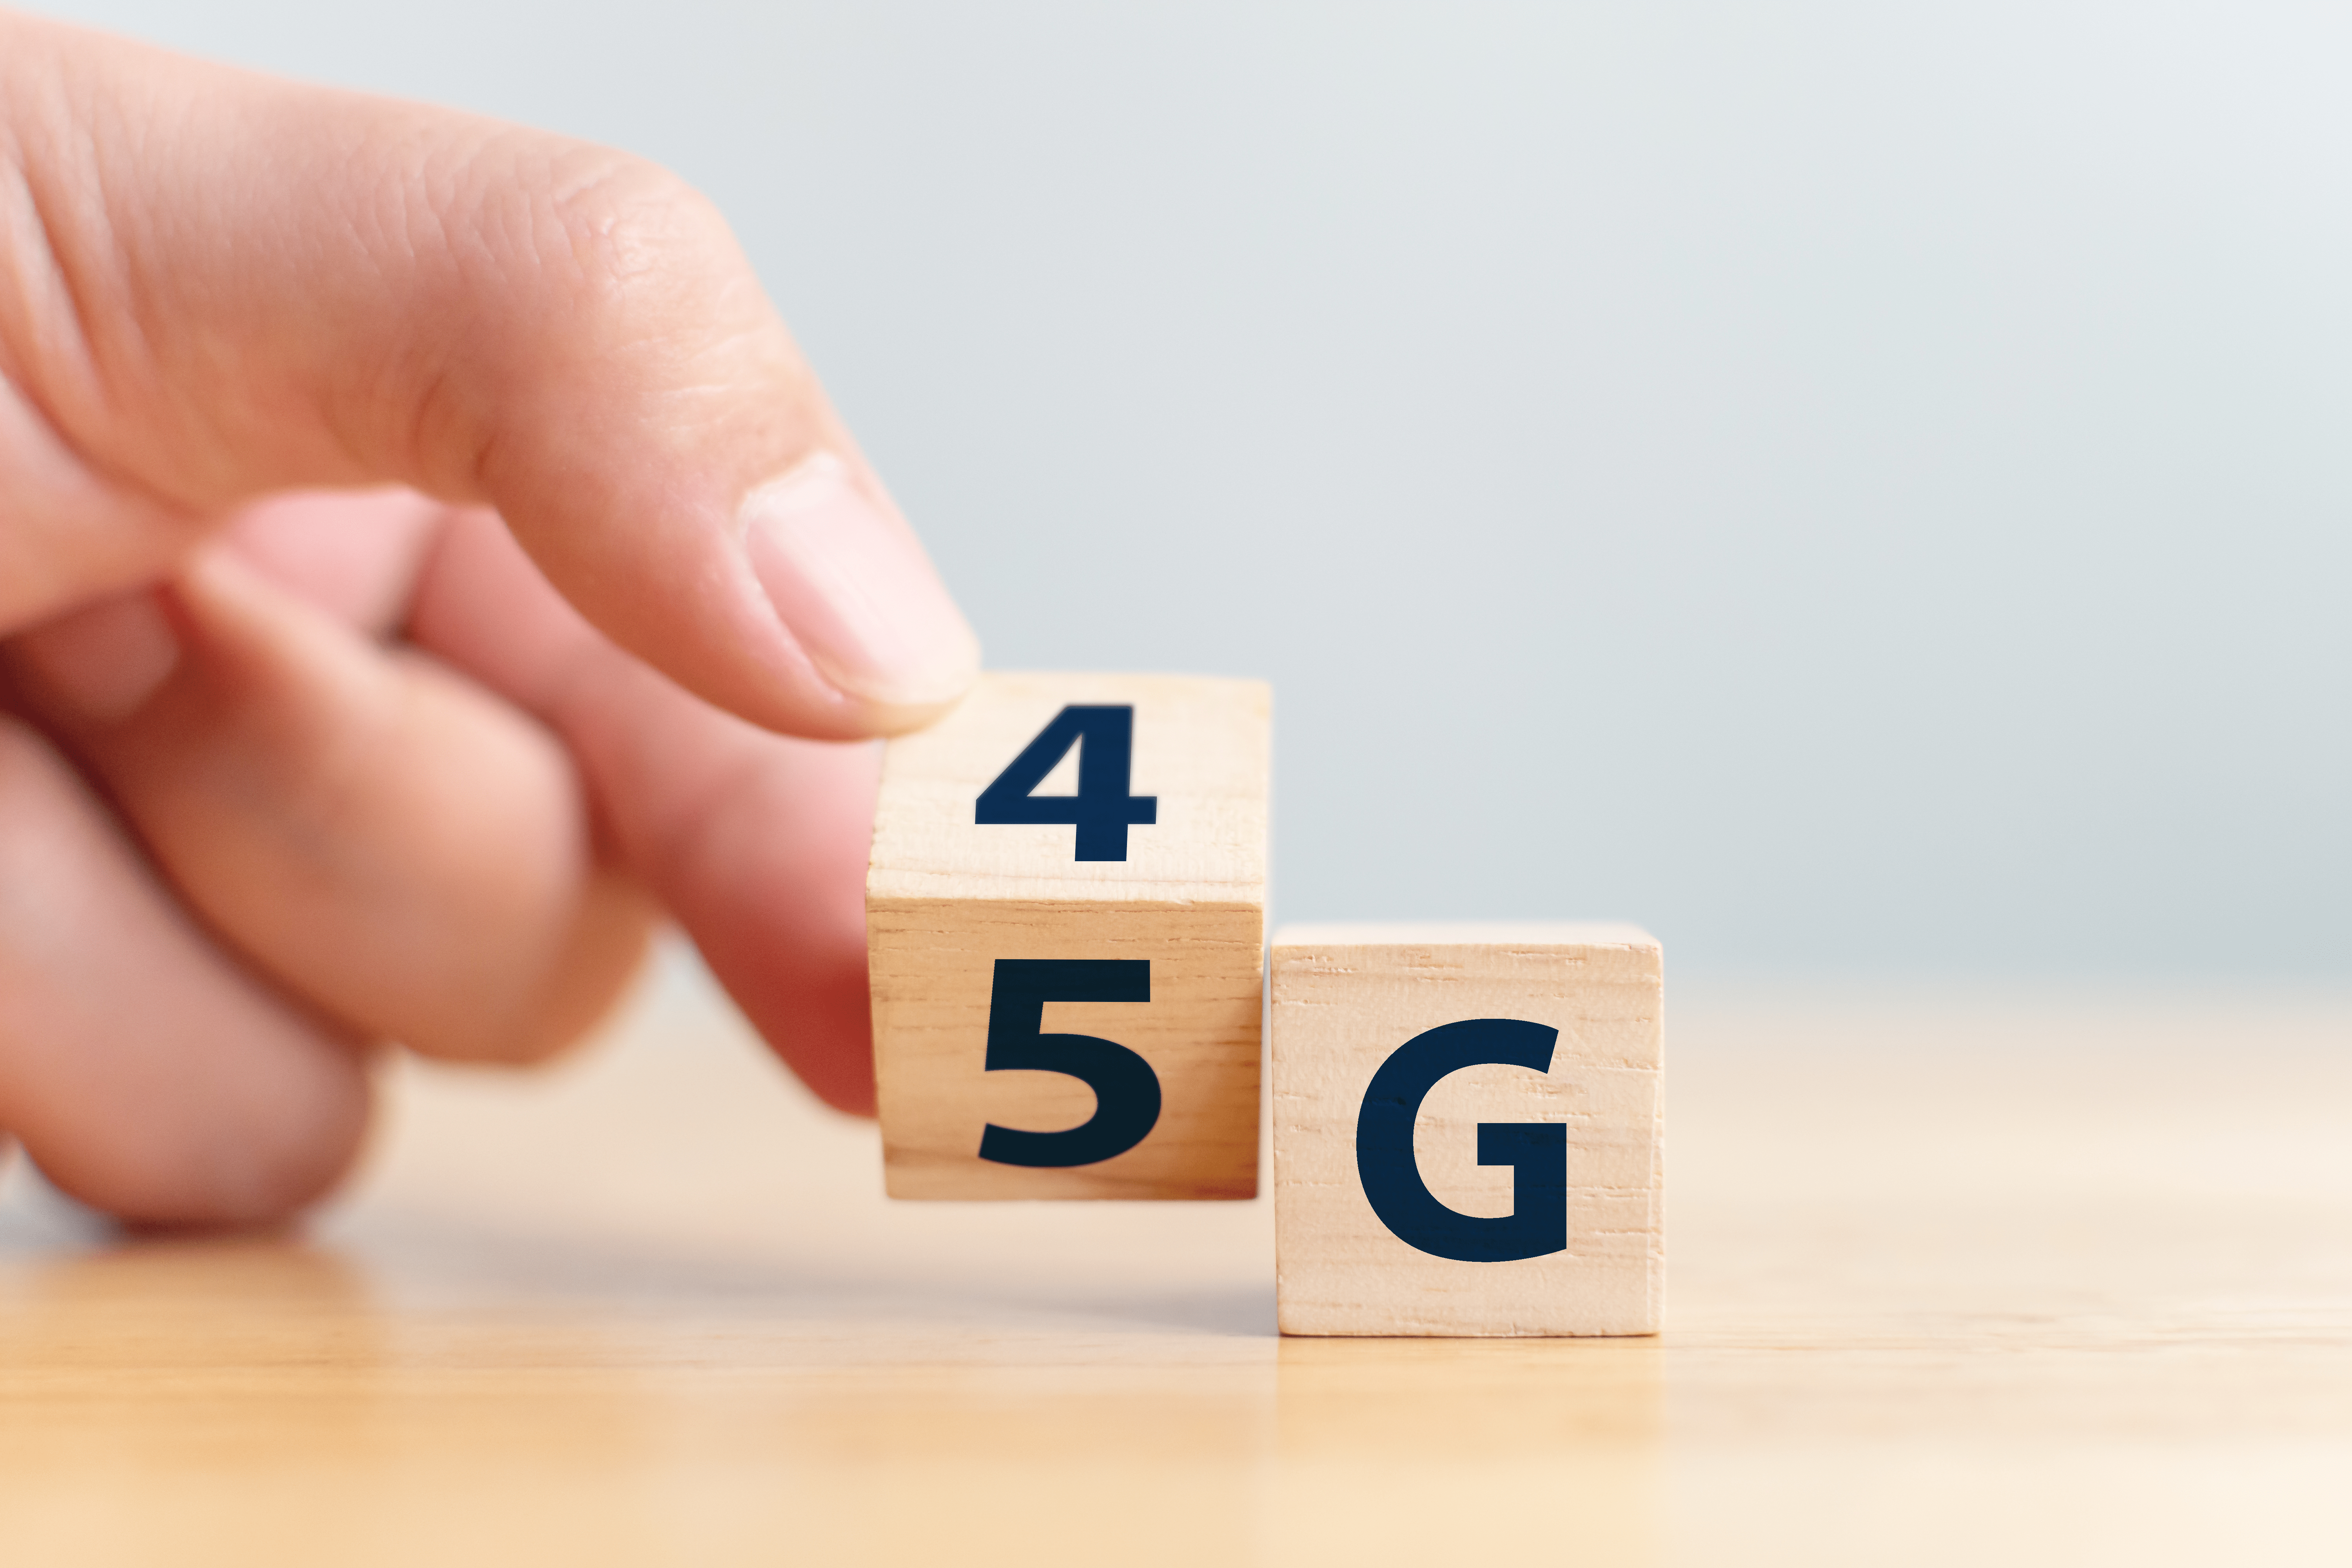 4G and 5G Aerials: How Are They Different?